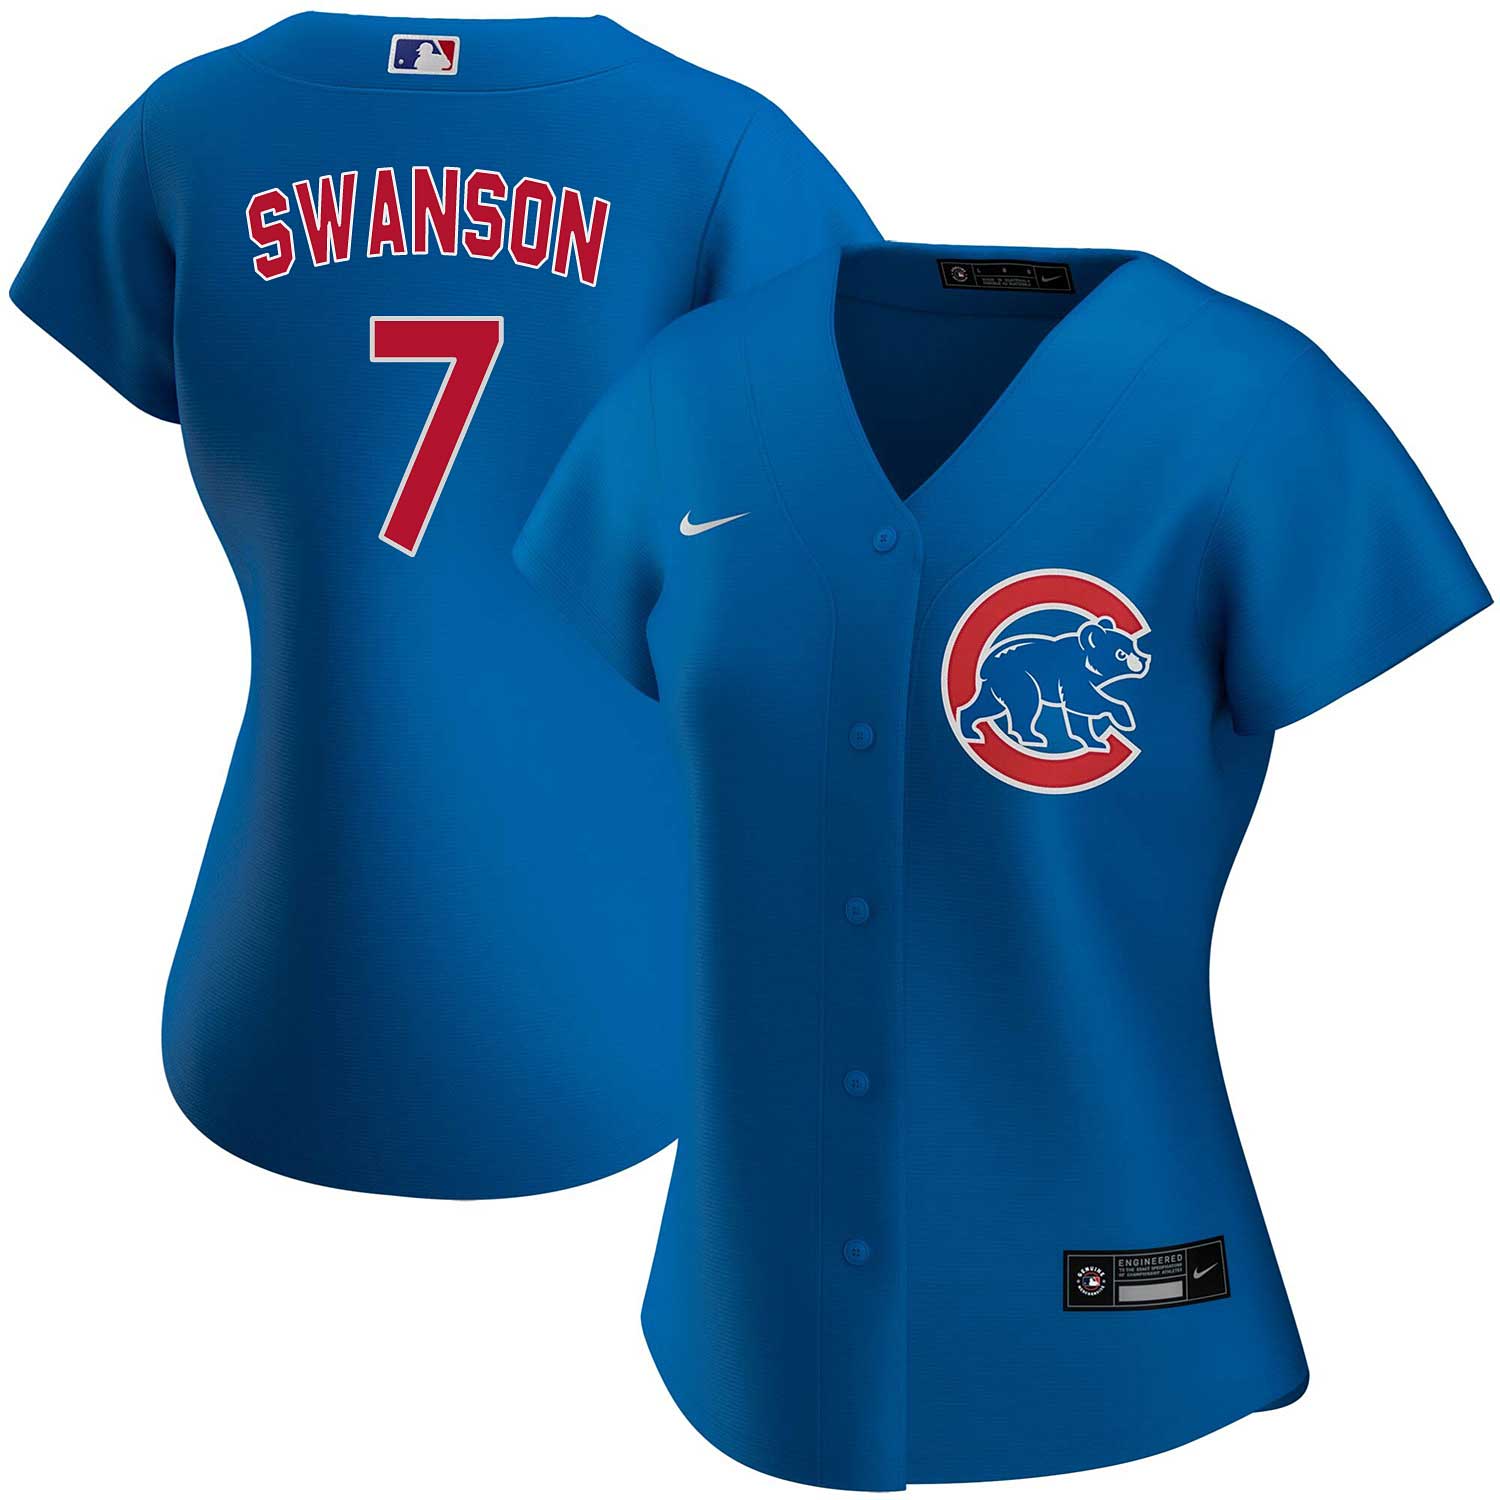 Official Dansby Swanson Jersey, Dansby Swanson Shirts, Baseball Apparel, Dansby  Swanson Cubs Gear